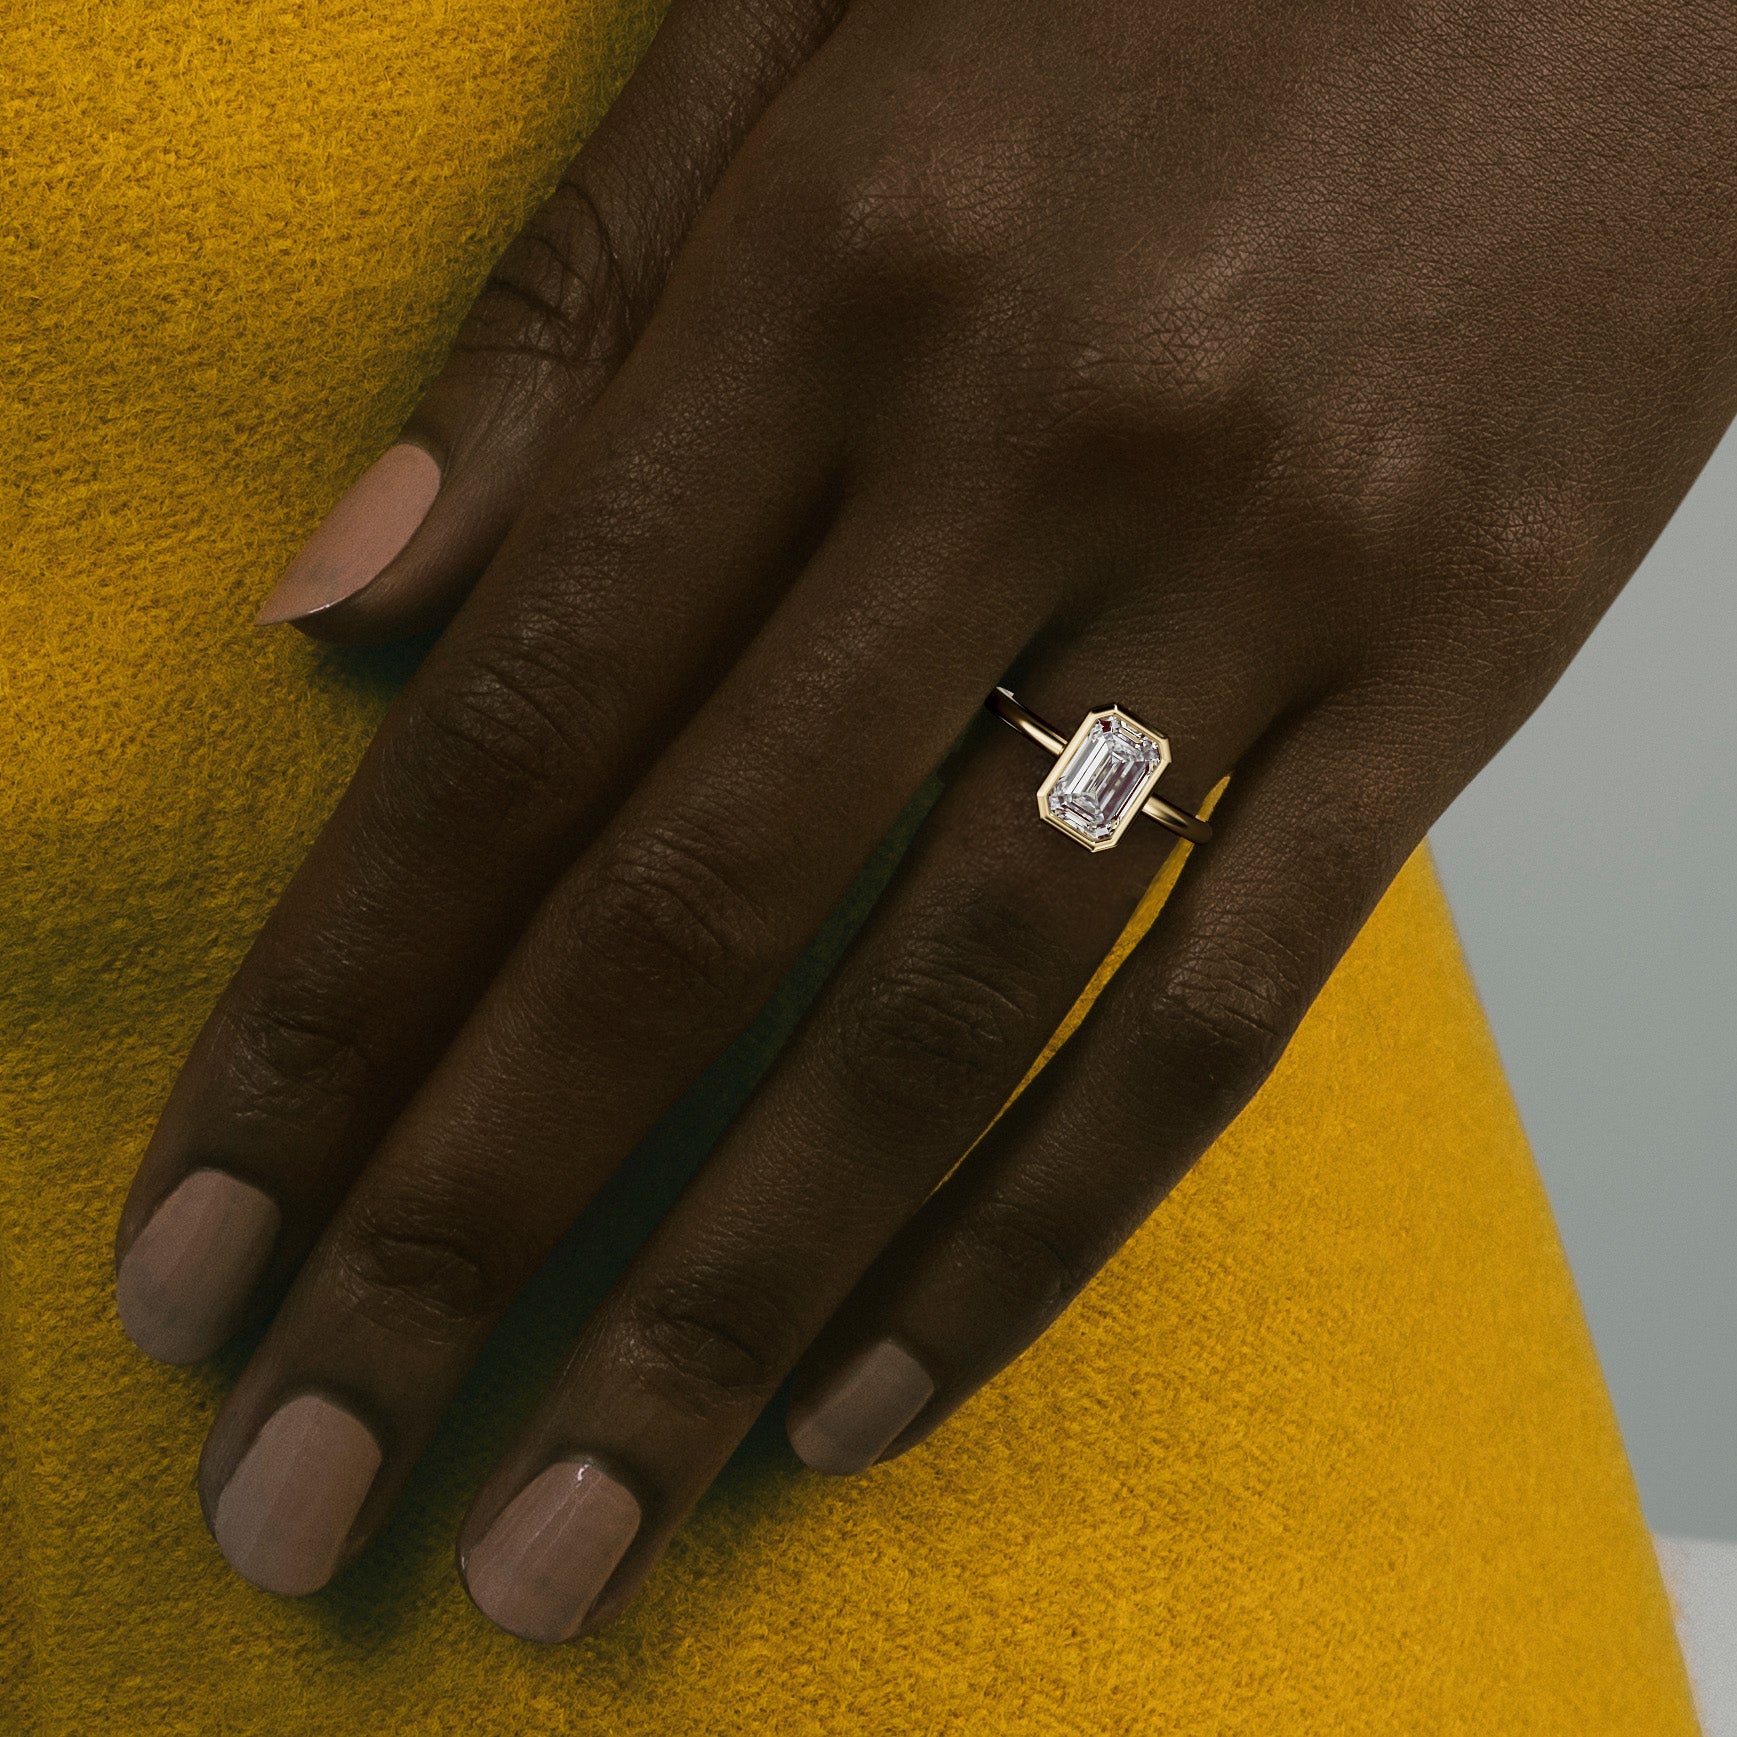 ARTI thin round band with North South Emerald Cut Profile Bezel Set Contemporary Diamond Precious Gemsone Engagement Ring Setting in recycled 14k Yellow Gold or platinum handcrafted by SHW Fine Jewelry NYC